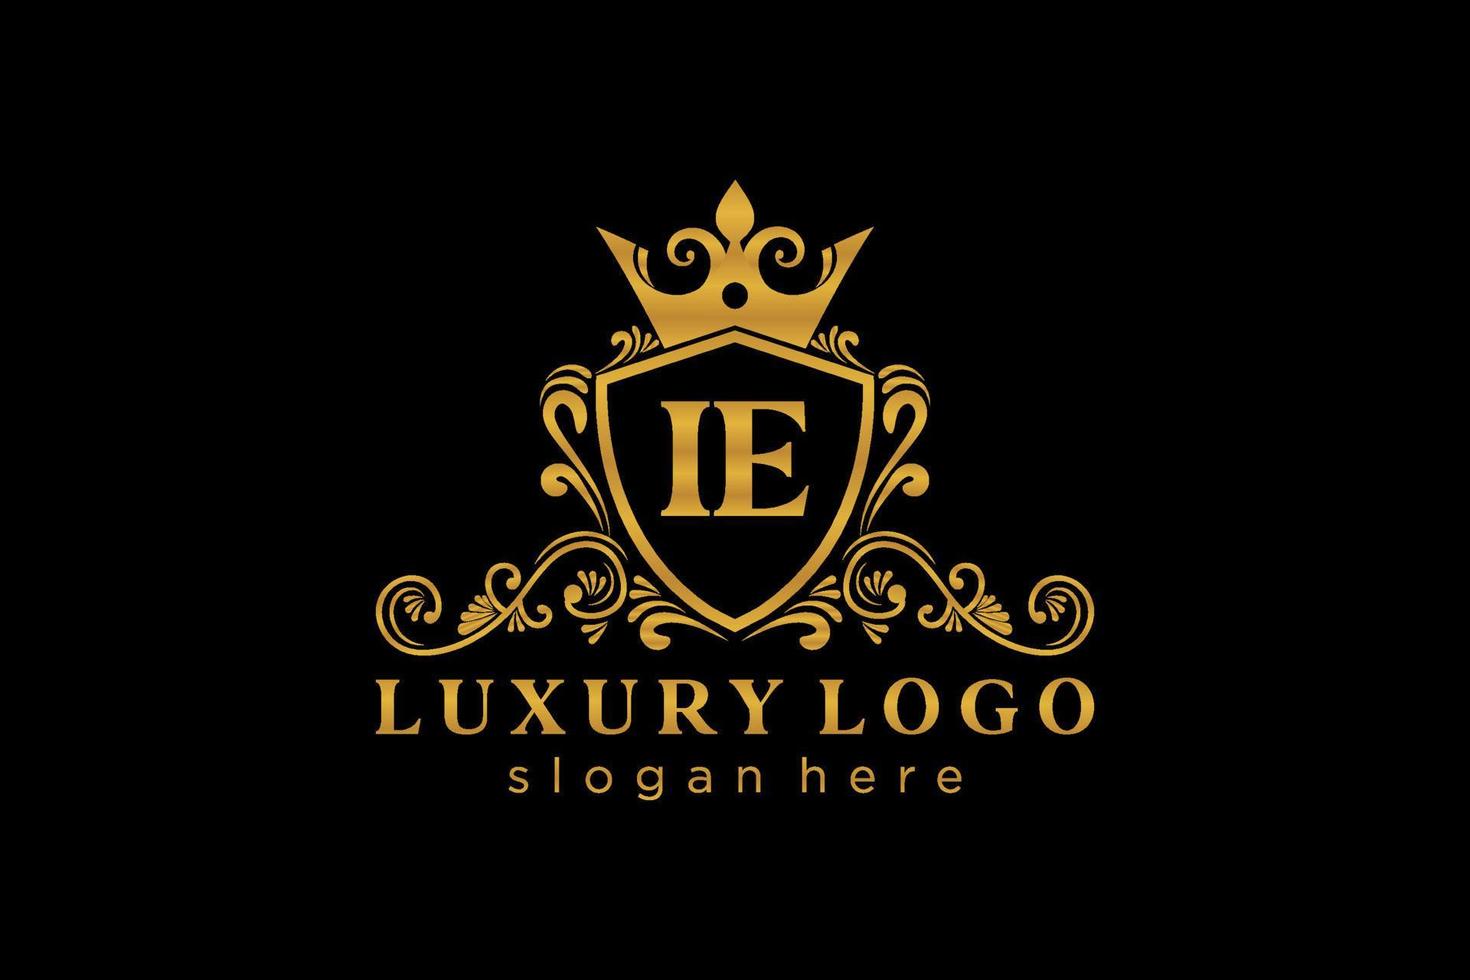 Initial IE Letter Royal Luxury Logo template in vector art for Restaurant, Royalty, Boutique, Cafe, Hotel, Heraldic, Jewelry, Fashion and other vector illustration.